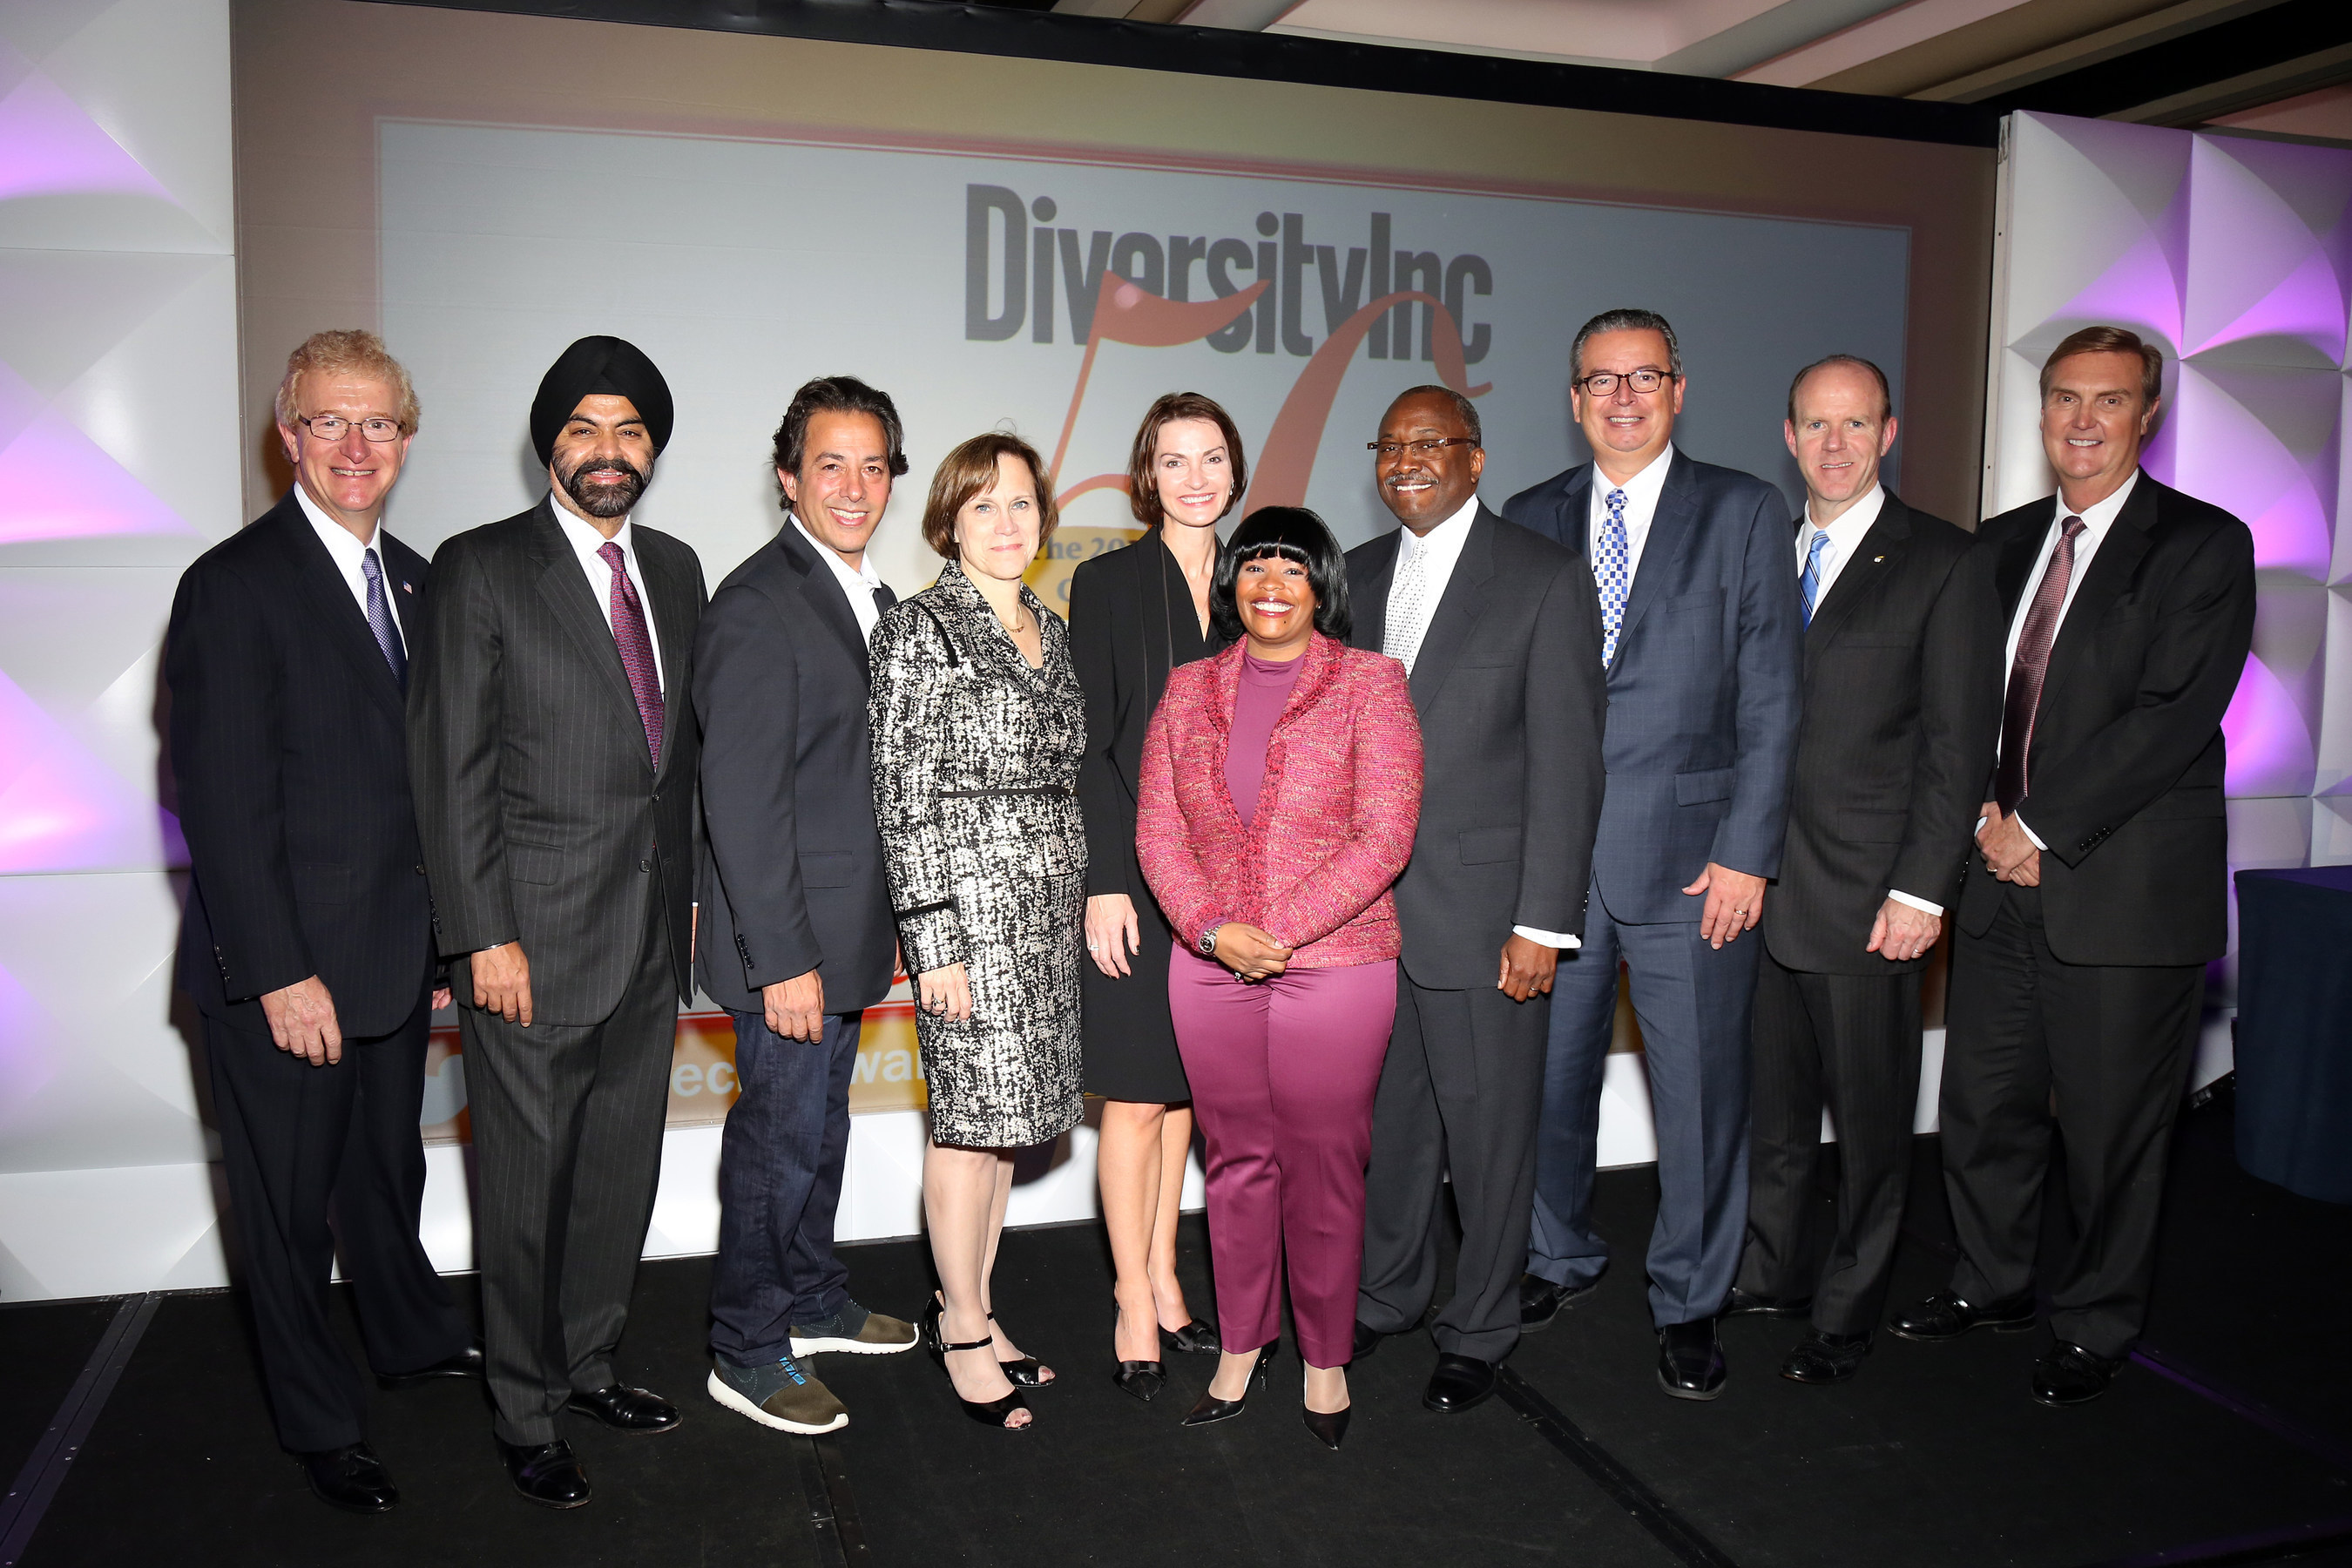 From left to right: Stephen Holmes, Chairman and CEO, Wyndham Worldwide; Ajay Banga, President and CEO, MasterCard Worldwide; Luke Visconti, CEO, DiversityInc; Barbara Frankel, SVP, Executive Editor, DiversityInc; Christi Shaw, President, Novartis Pharmaceuticals Corporation; Carolynn Johnson, COO, DiversityInc; Willie Deese, EVP and President, Merck Manufacturing Division; George Chavel, President and CEO, Sodexo; Stephen Howe Jr., Americas Managing Partner, EY; and Stephen J. Rohleder, Group Chief...